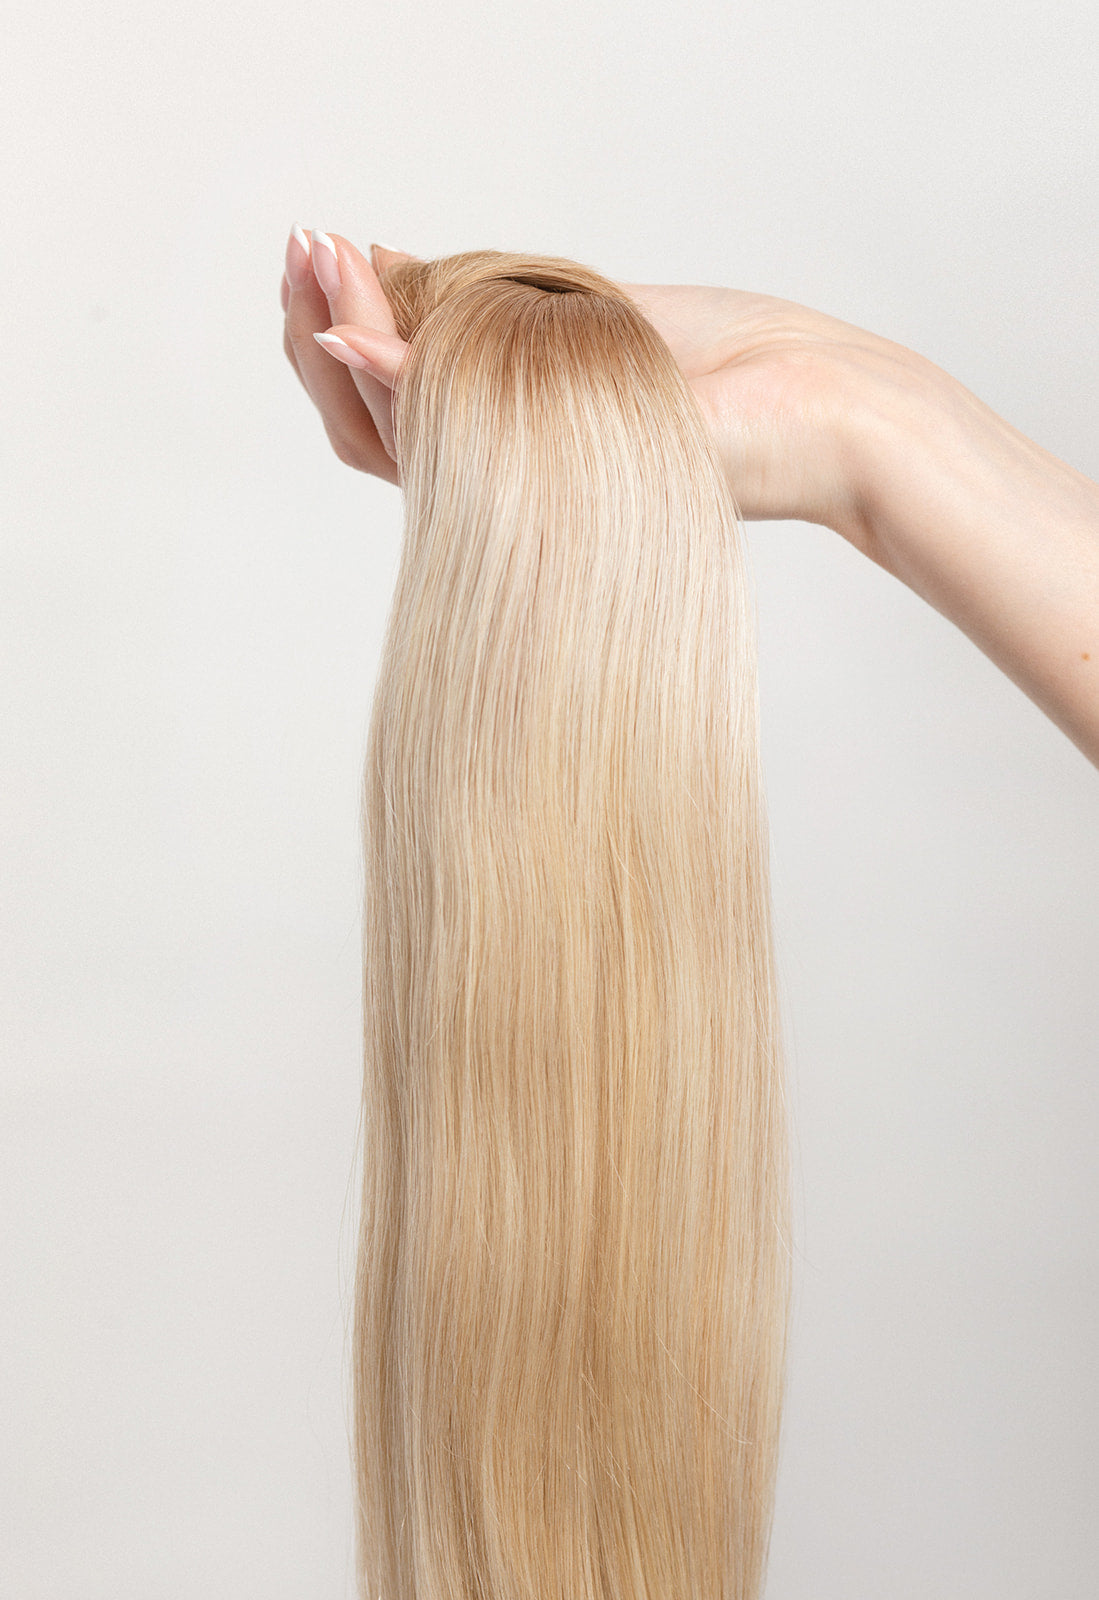 Soleil Sand is our golden blonde blend cascading from a Sand root.Stylist lingo: Natural rooted level 8 blended into natural/gold dimensional levels 8 &amp; 10 Harloc Tape-In Extensions are made from ethically sourced, premium, Remy Slavic Hair. These reusable hair extensions can be used to add length, volume, chemical-free colour, or to correct or enhance a haircut. Available in 16 beautiful shades. Combine multiple colours to create a custom colour blend and perfect match.